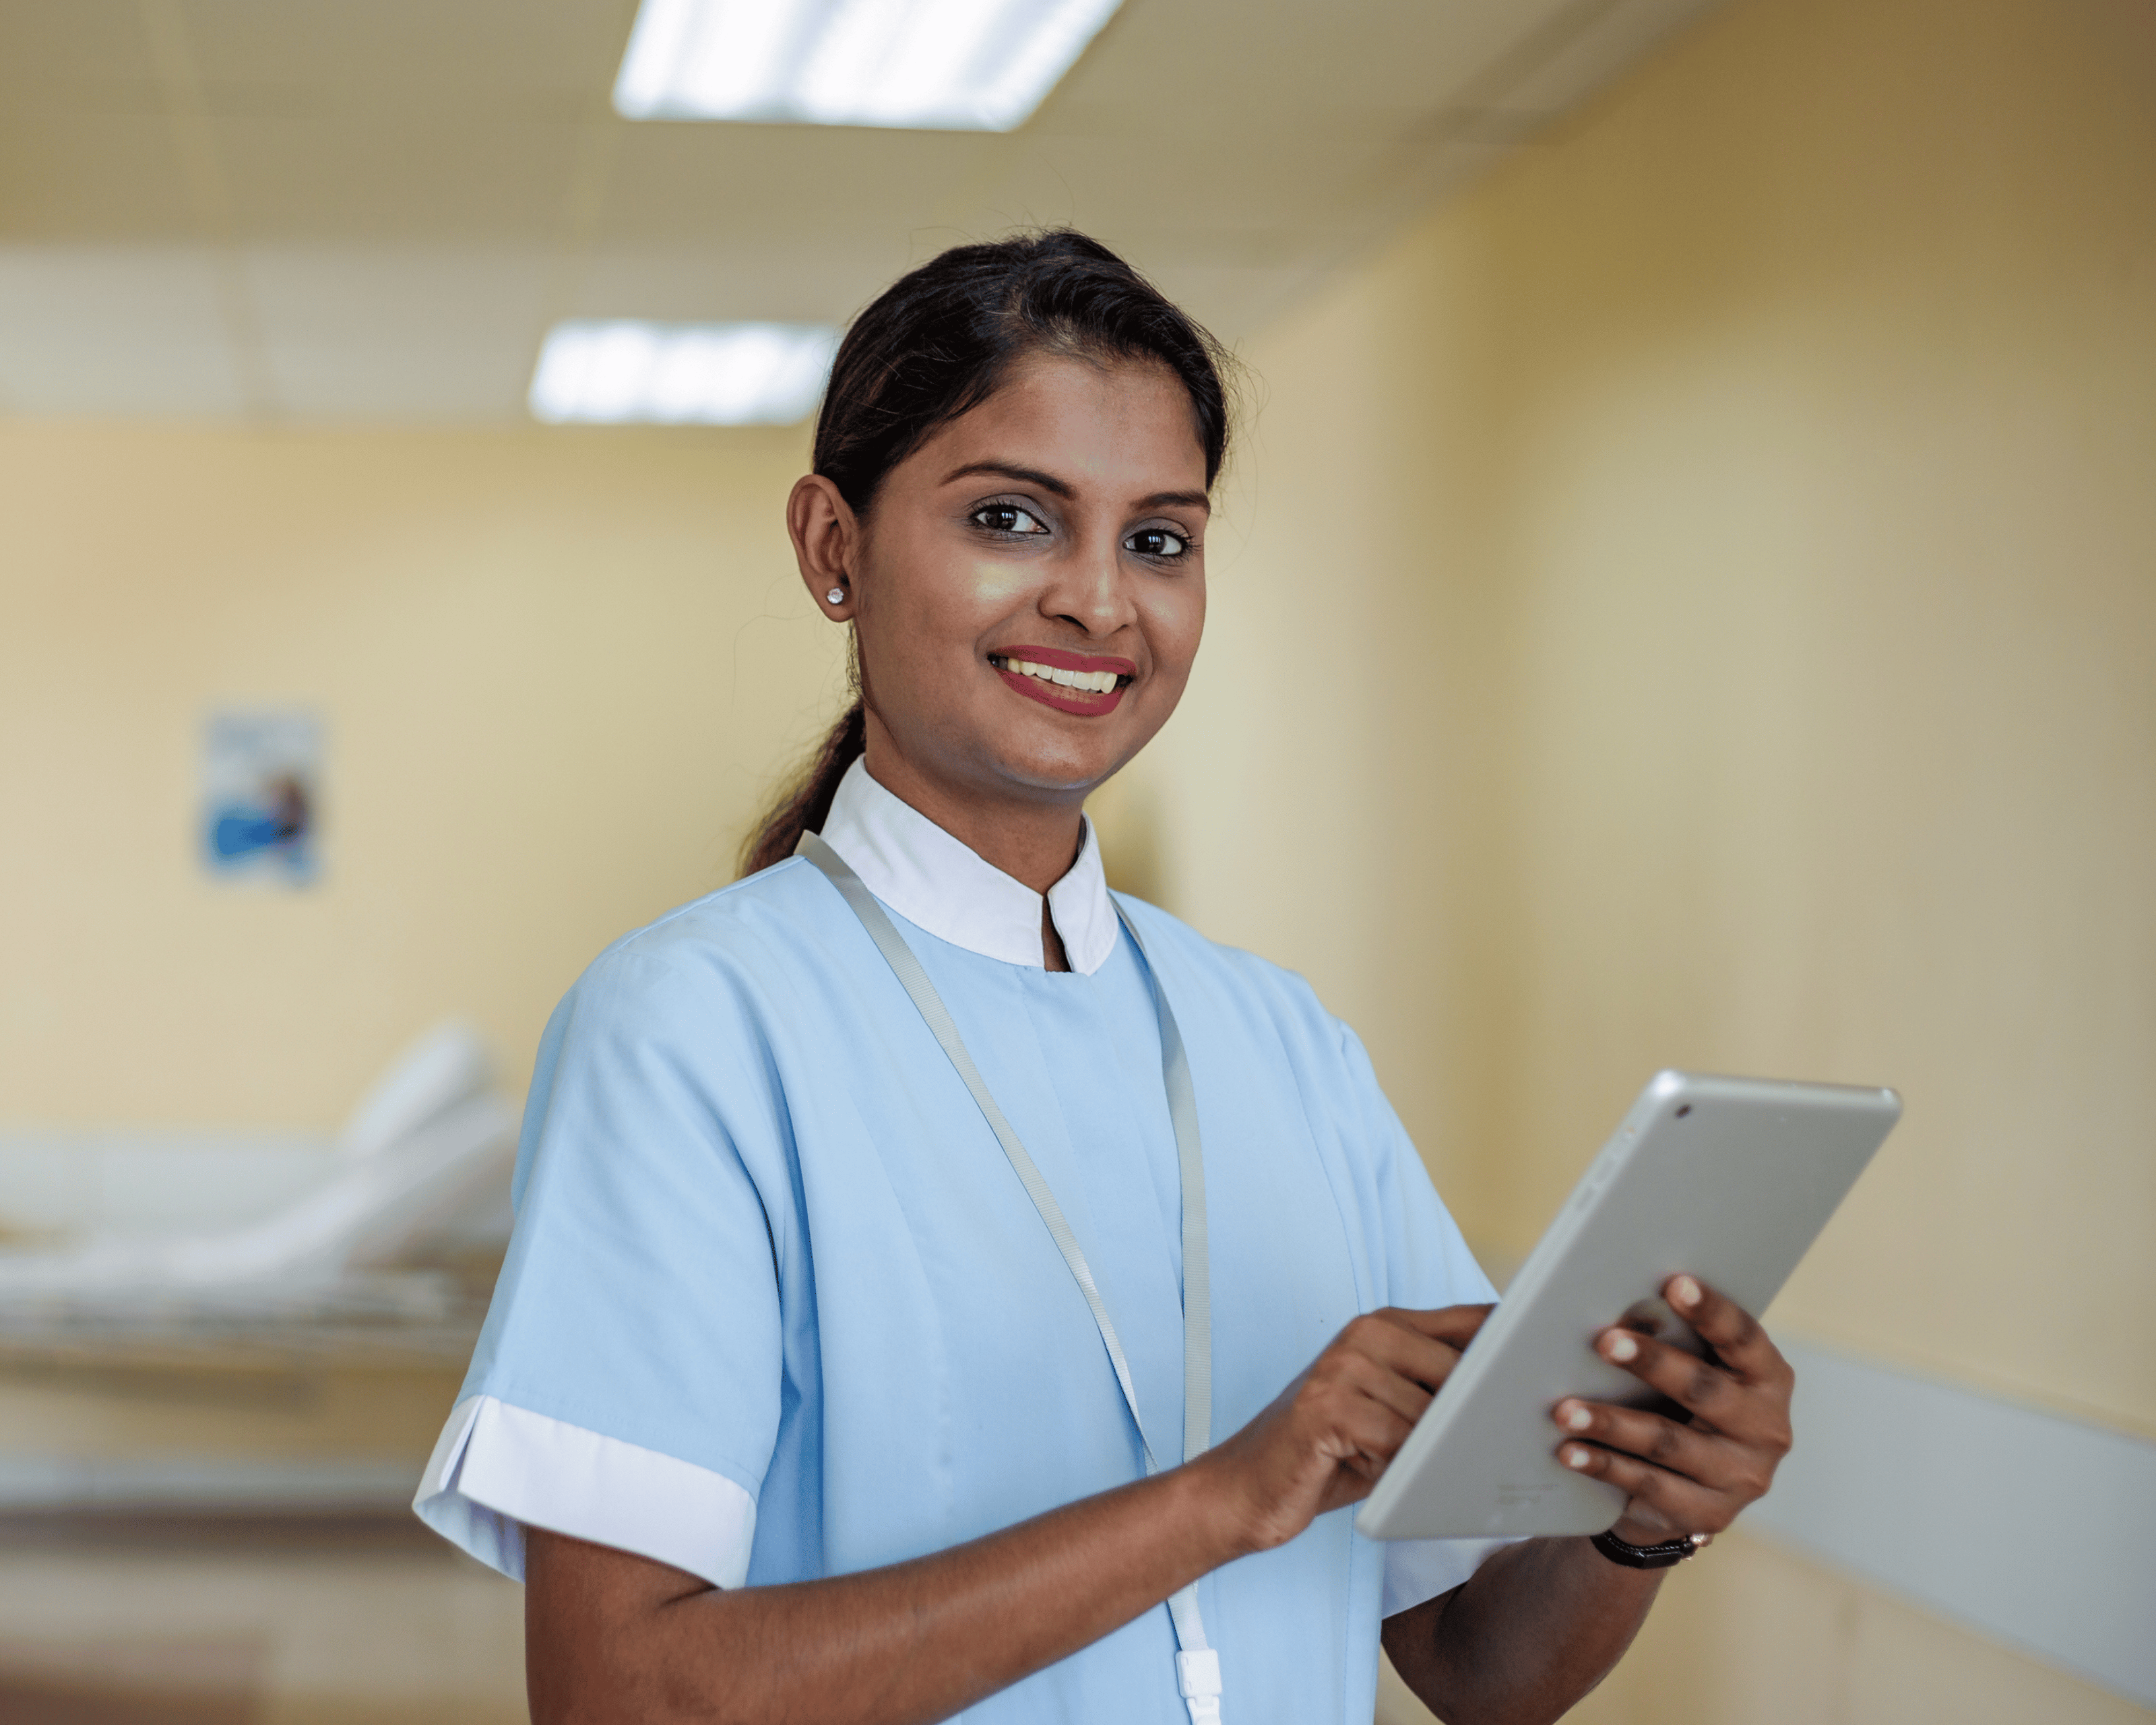 Apply for NMC registration with OET – the accepted English language test for International nurses applying to work in the UK.